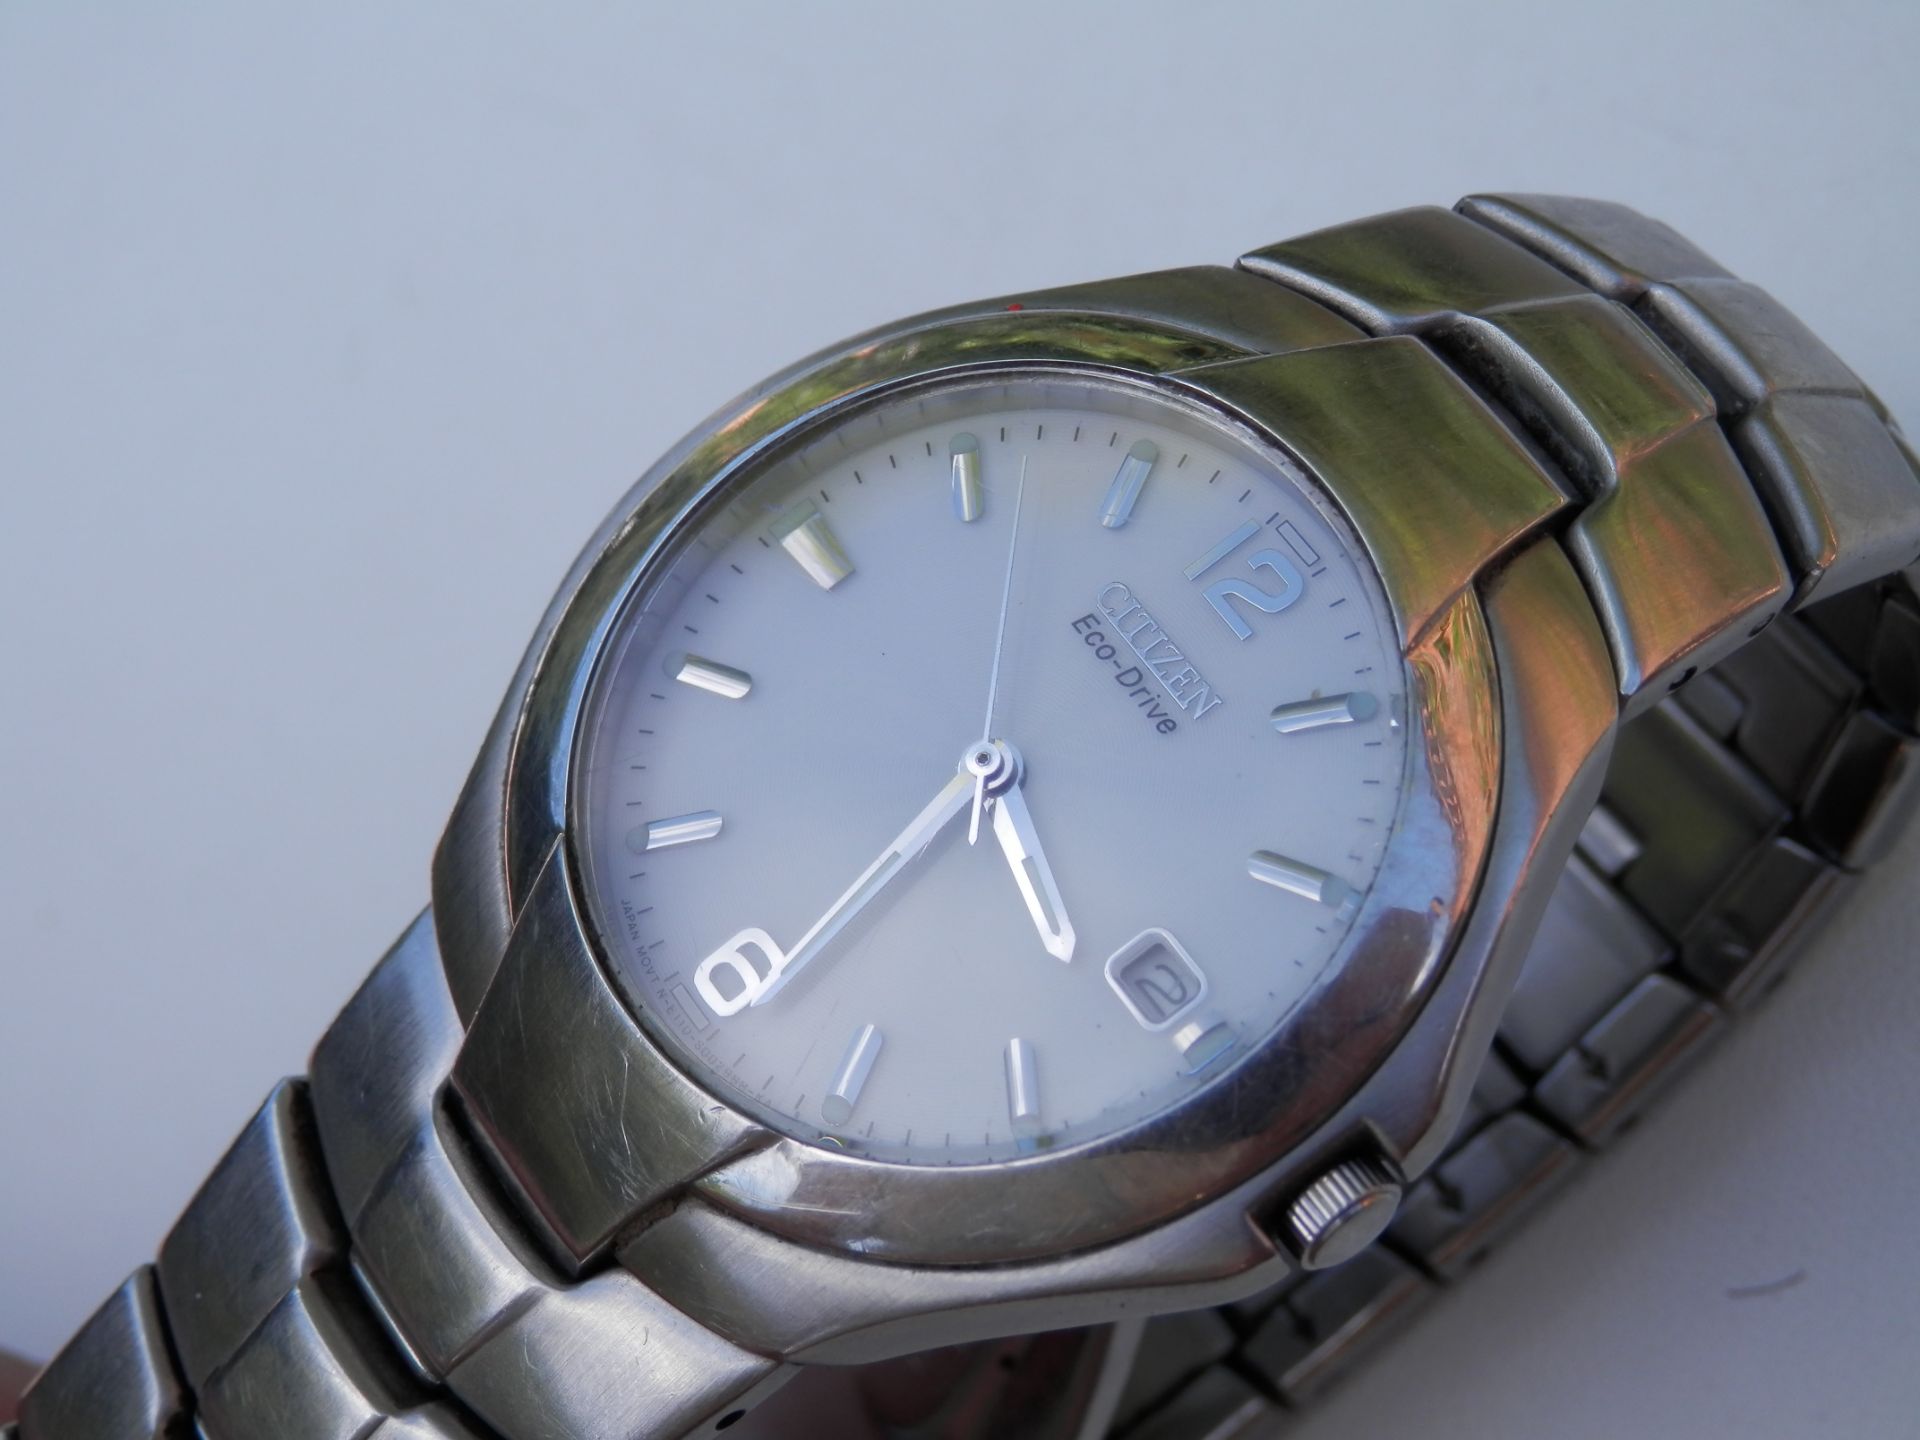 FULL STAINLESS GENTS CITIZEN ECO DRIVE SOLAR POWERED DATE WATCH, WORKING WITH 8"+ STRAP. RRP £189. - Image 3 of 6